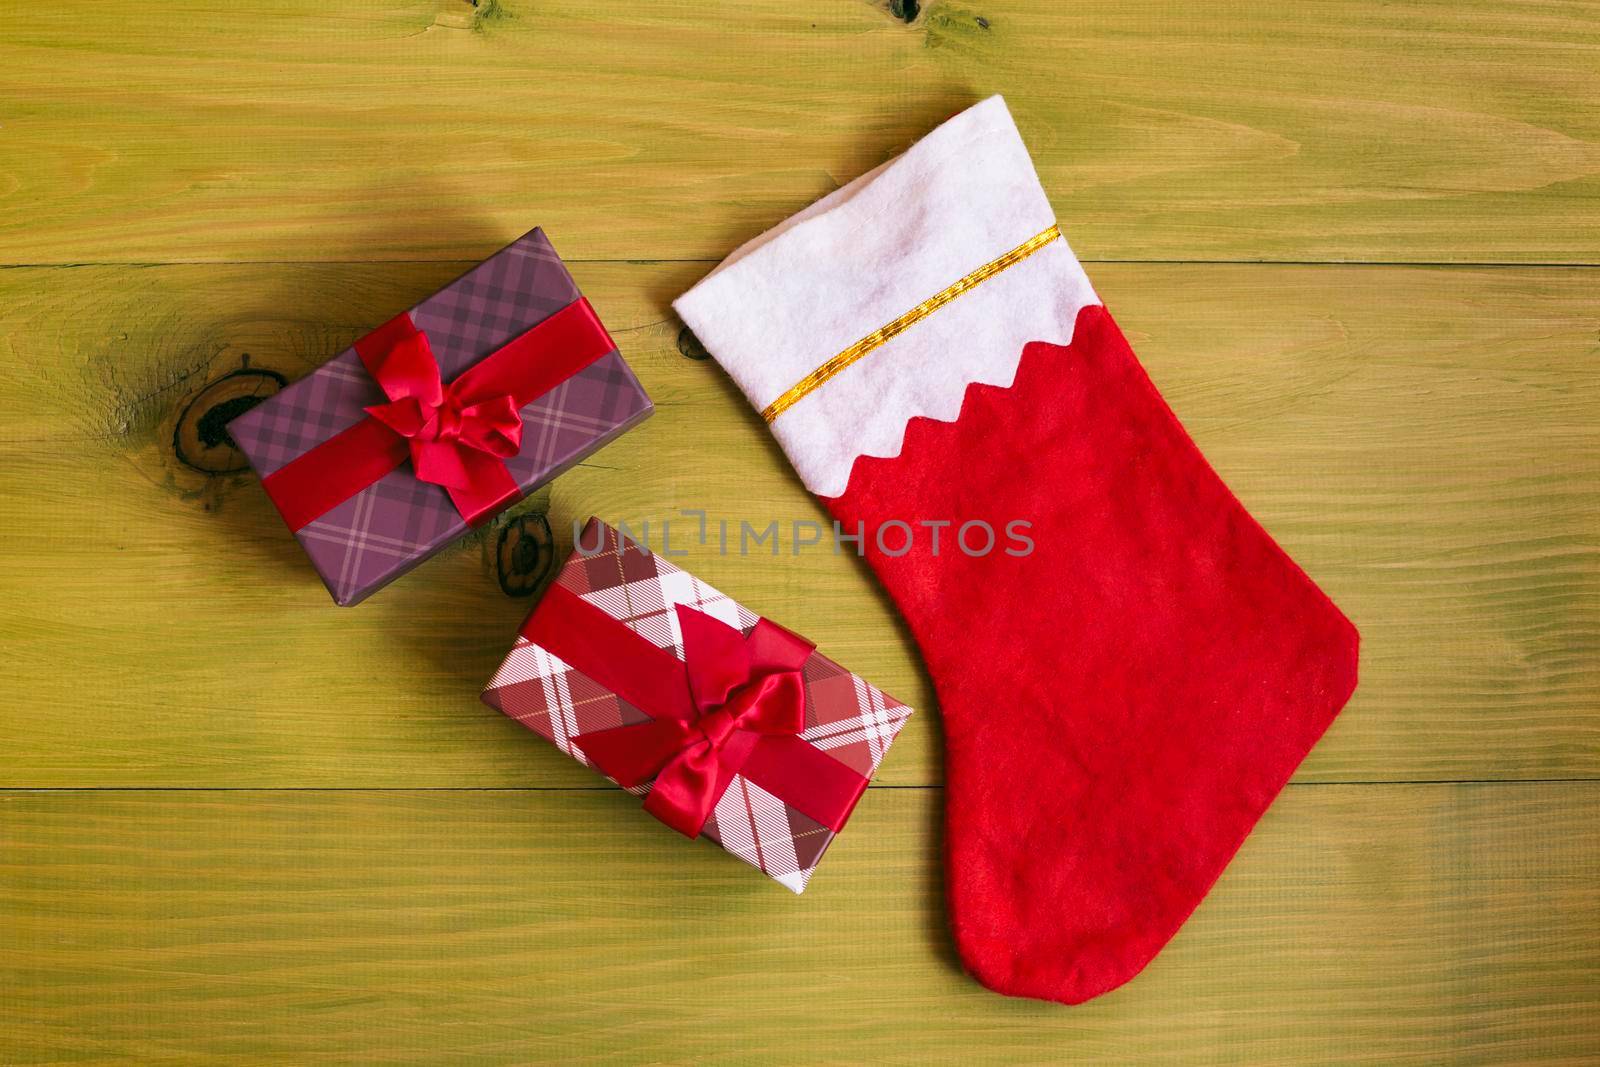 Image of Christmas Stocking and gifts on wooden table.